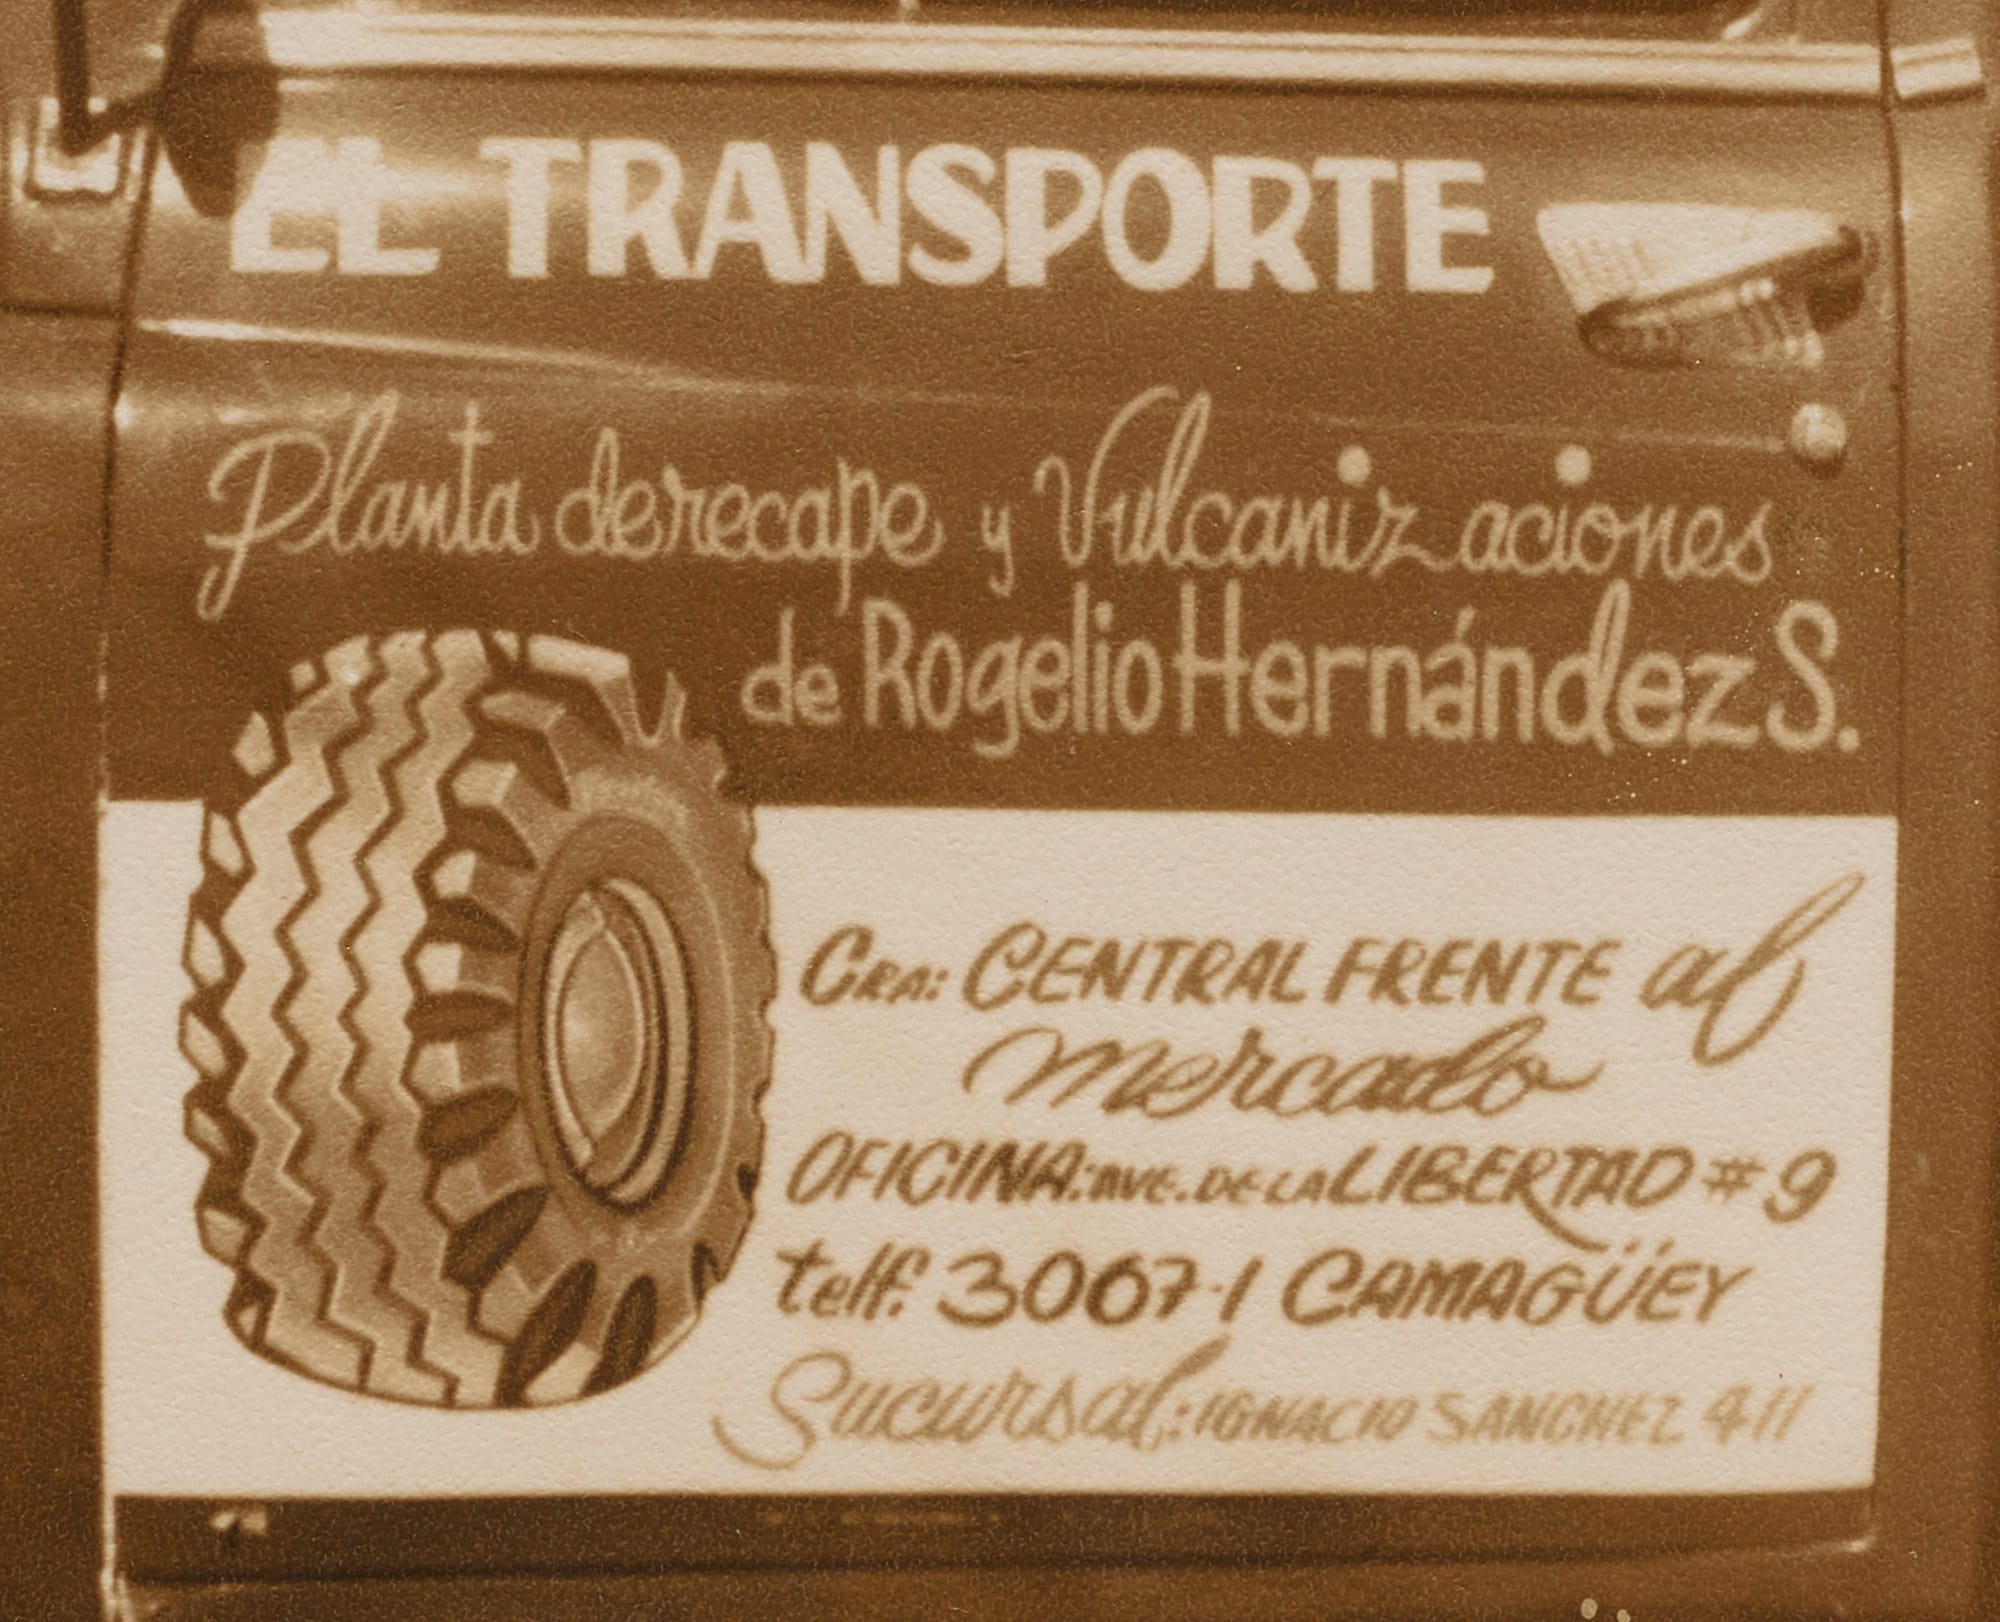 Detail of a hand-lettered truck door with a picture of a tyre and lettering for "El Transporte".